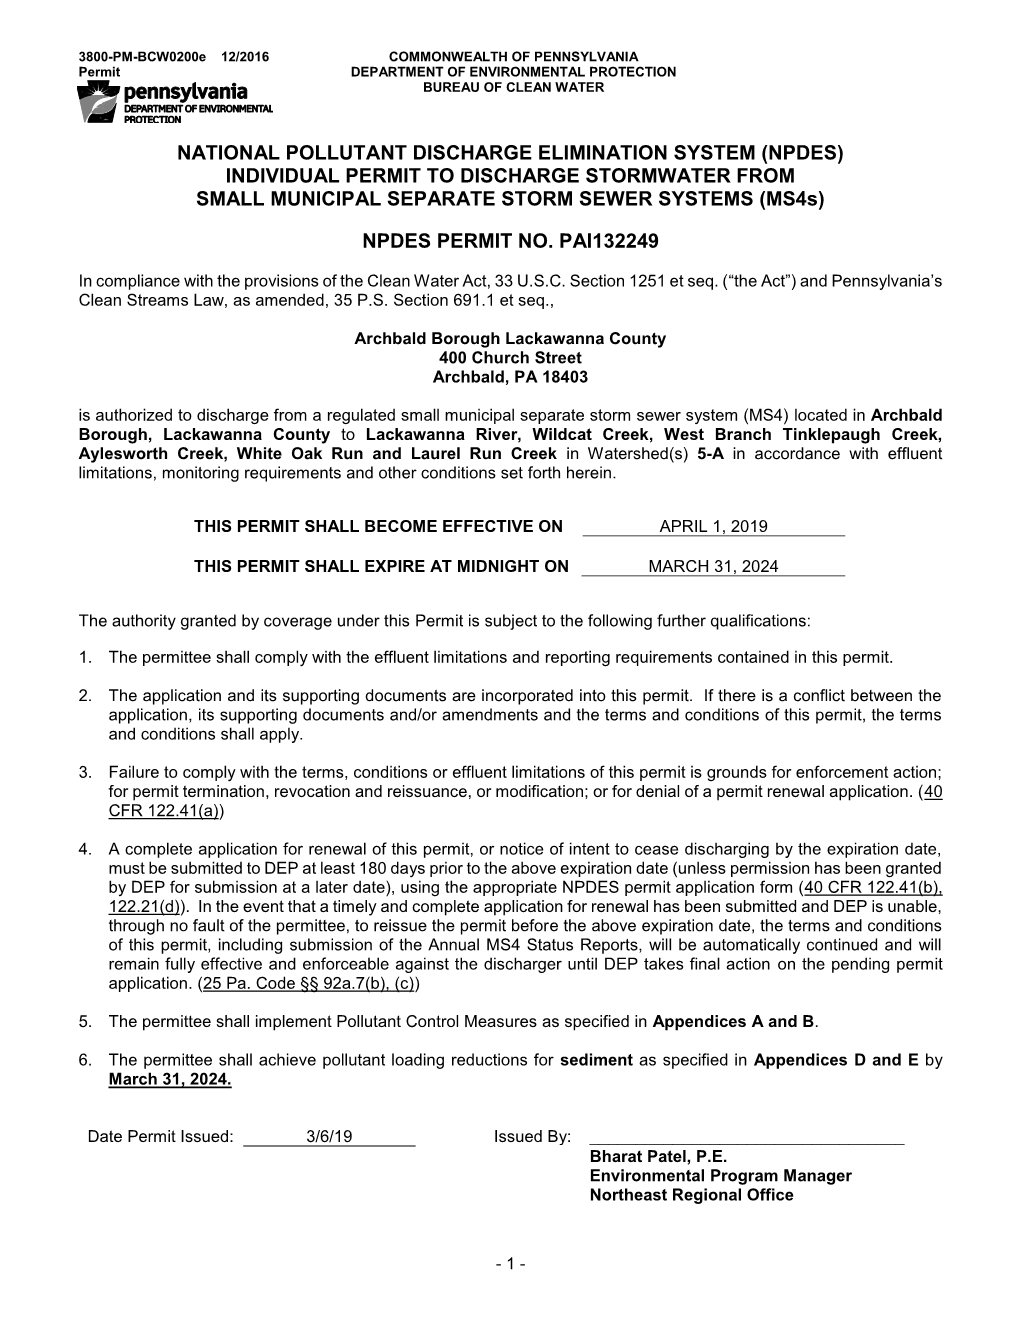 NATIONAL POLLUTANT DISCHARGE ELIMINATION SYSTEM (NPDES) INDIVIDUAL PERMIT to DISCHARGE STORMWATER from SMALL MUNICIPAL SEPARATE STORM SEWER SYSTEMS (Ms4s)